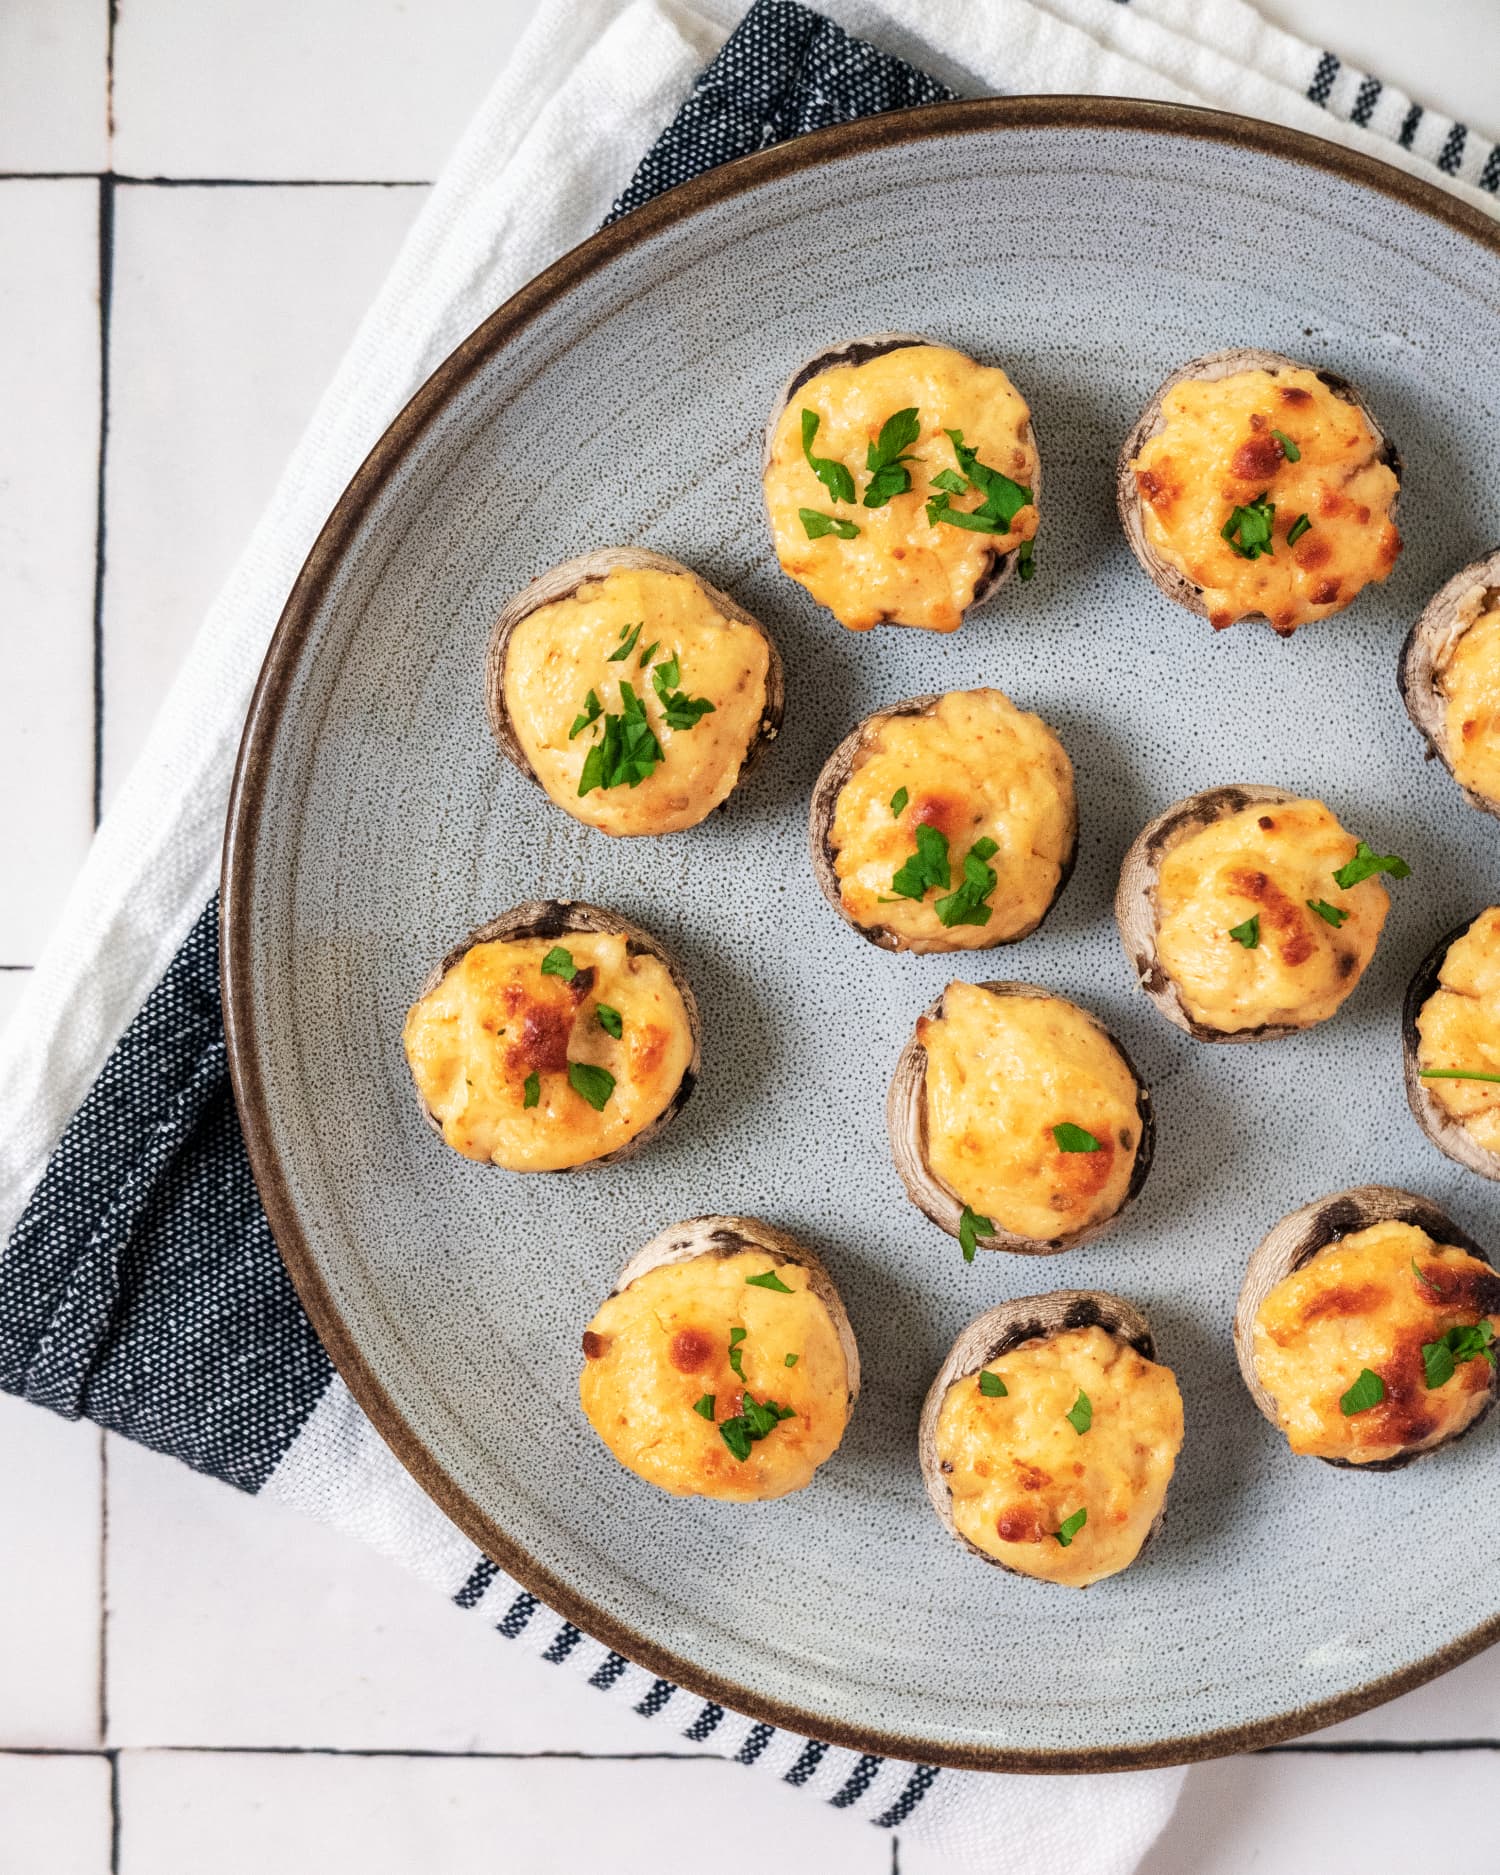 Cream Cheese Stuffed Mushrooms Will Be the First Appetizer to Disappear This Thanksgiving